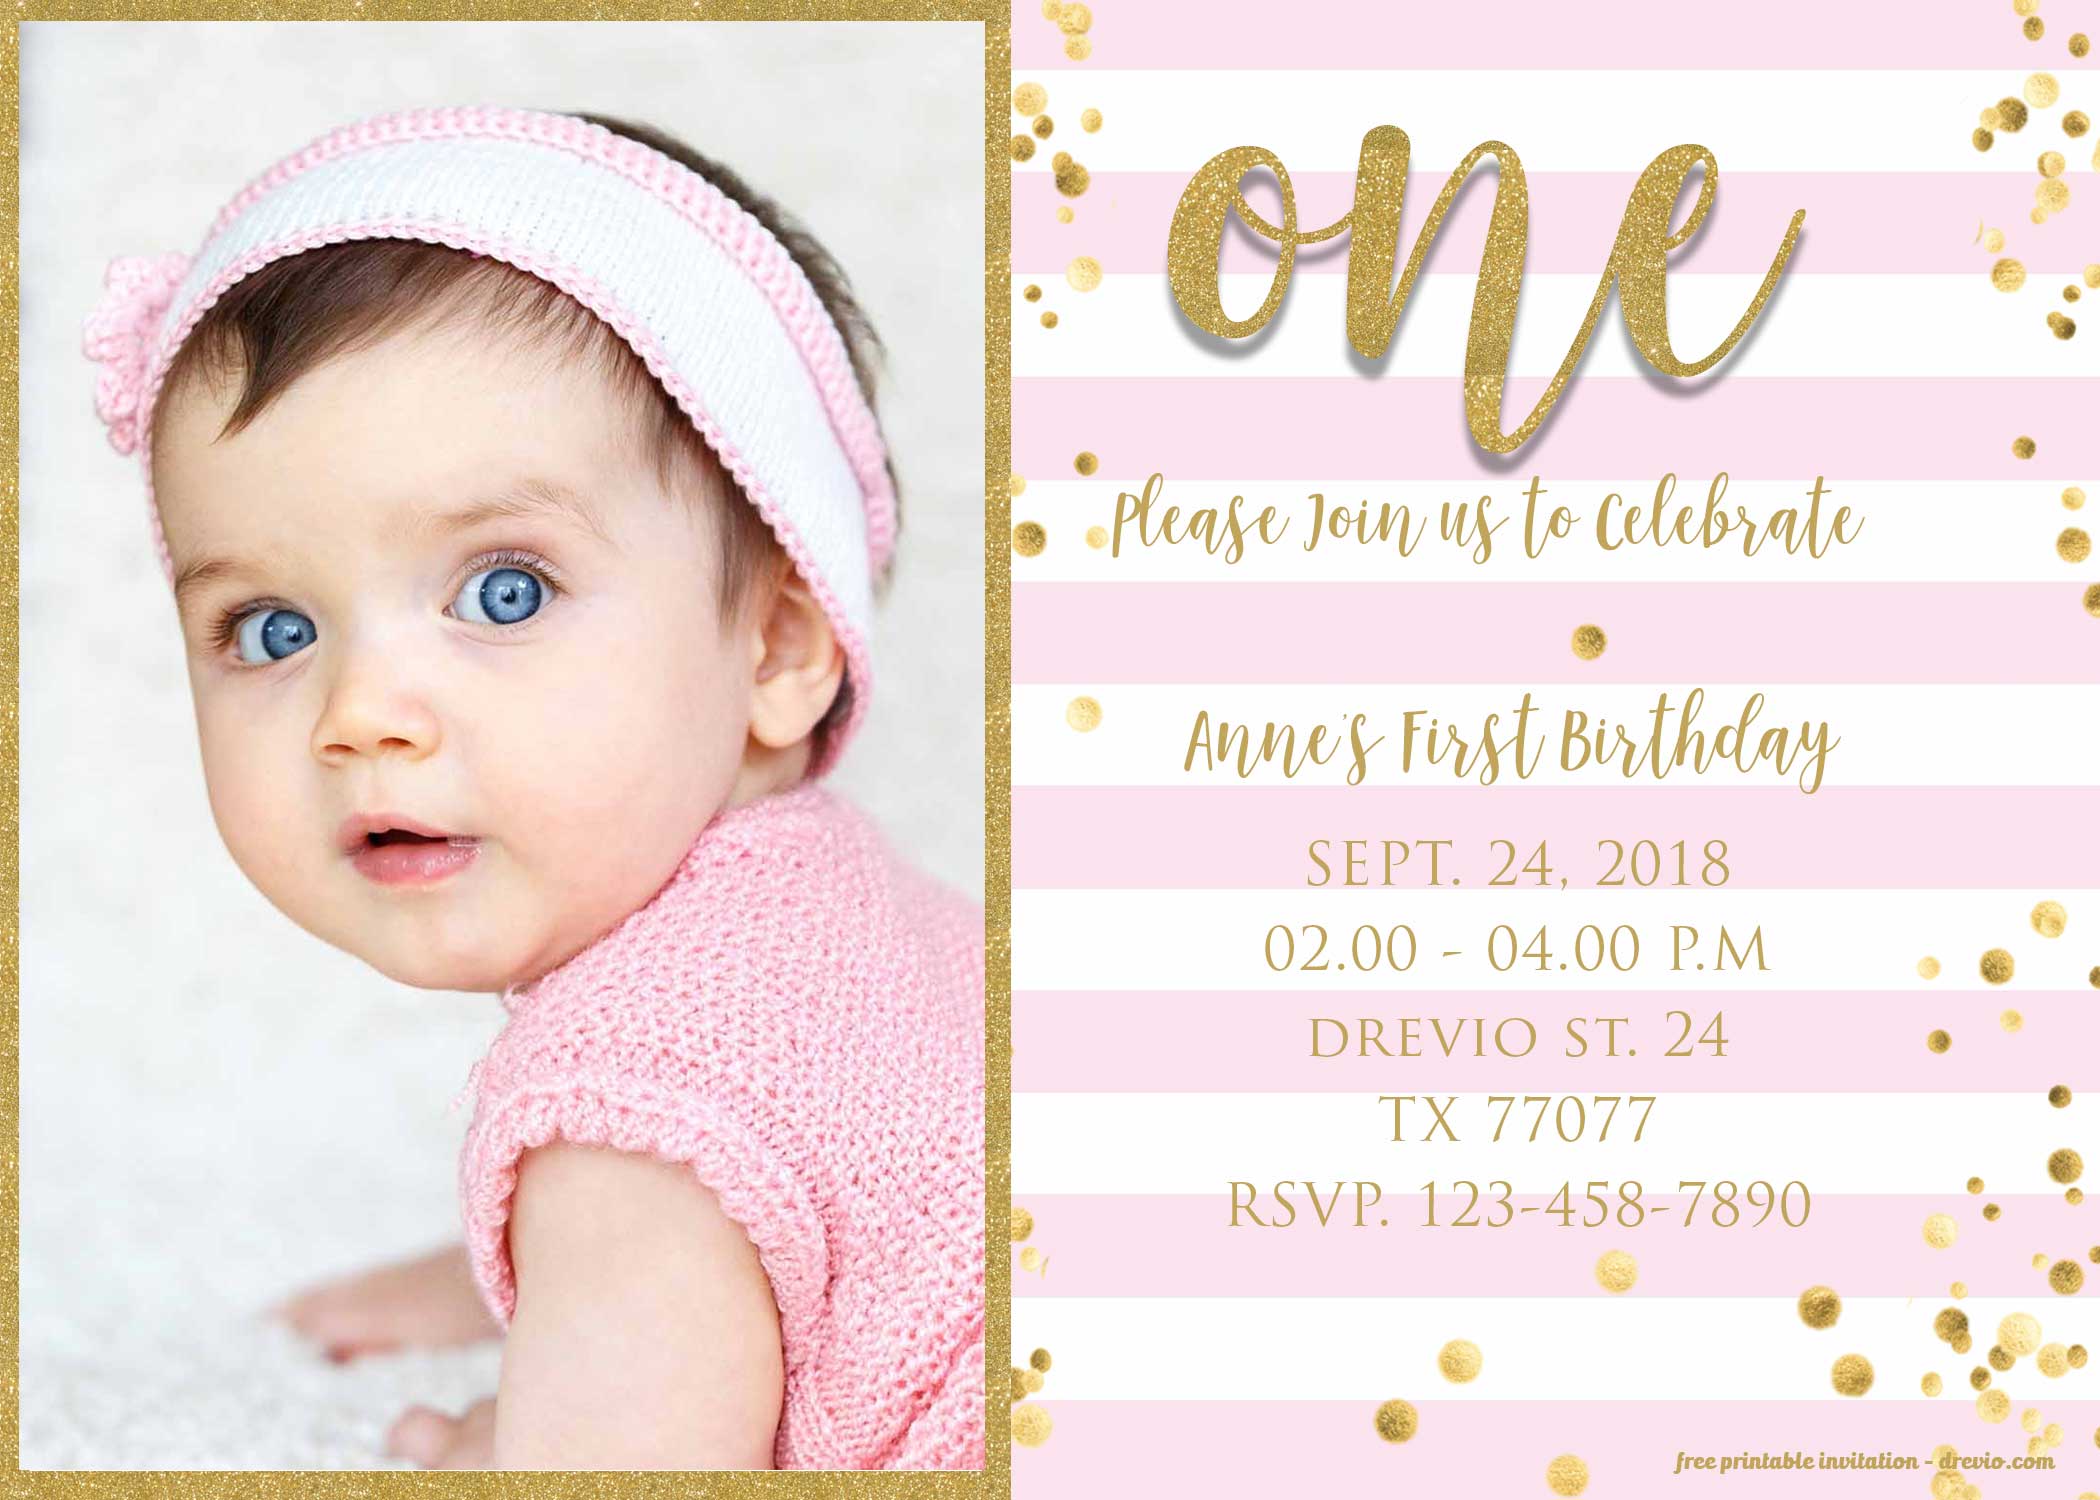 FREE 21st Birthday Invitation Pink and Gold glitter Template In First Birthday Invitation Card Template